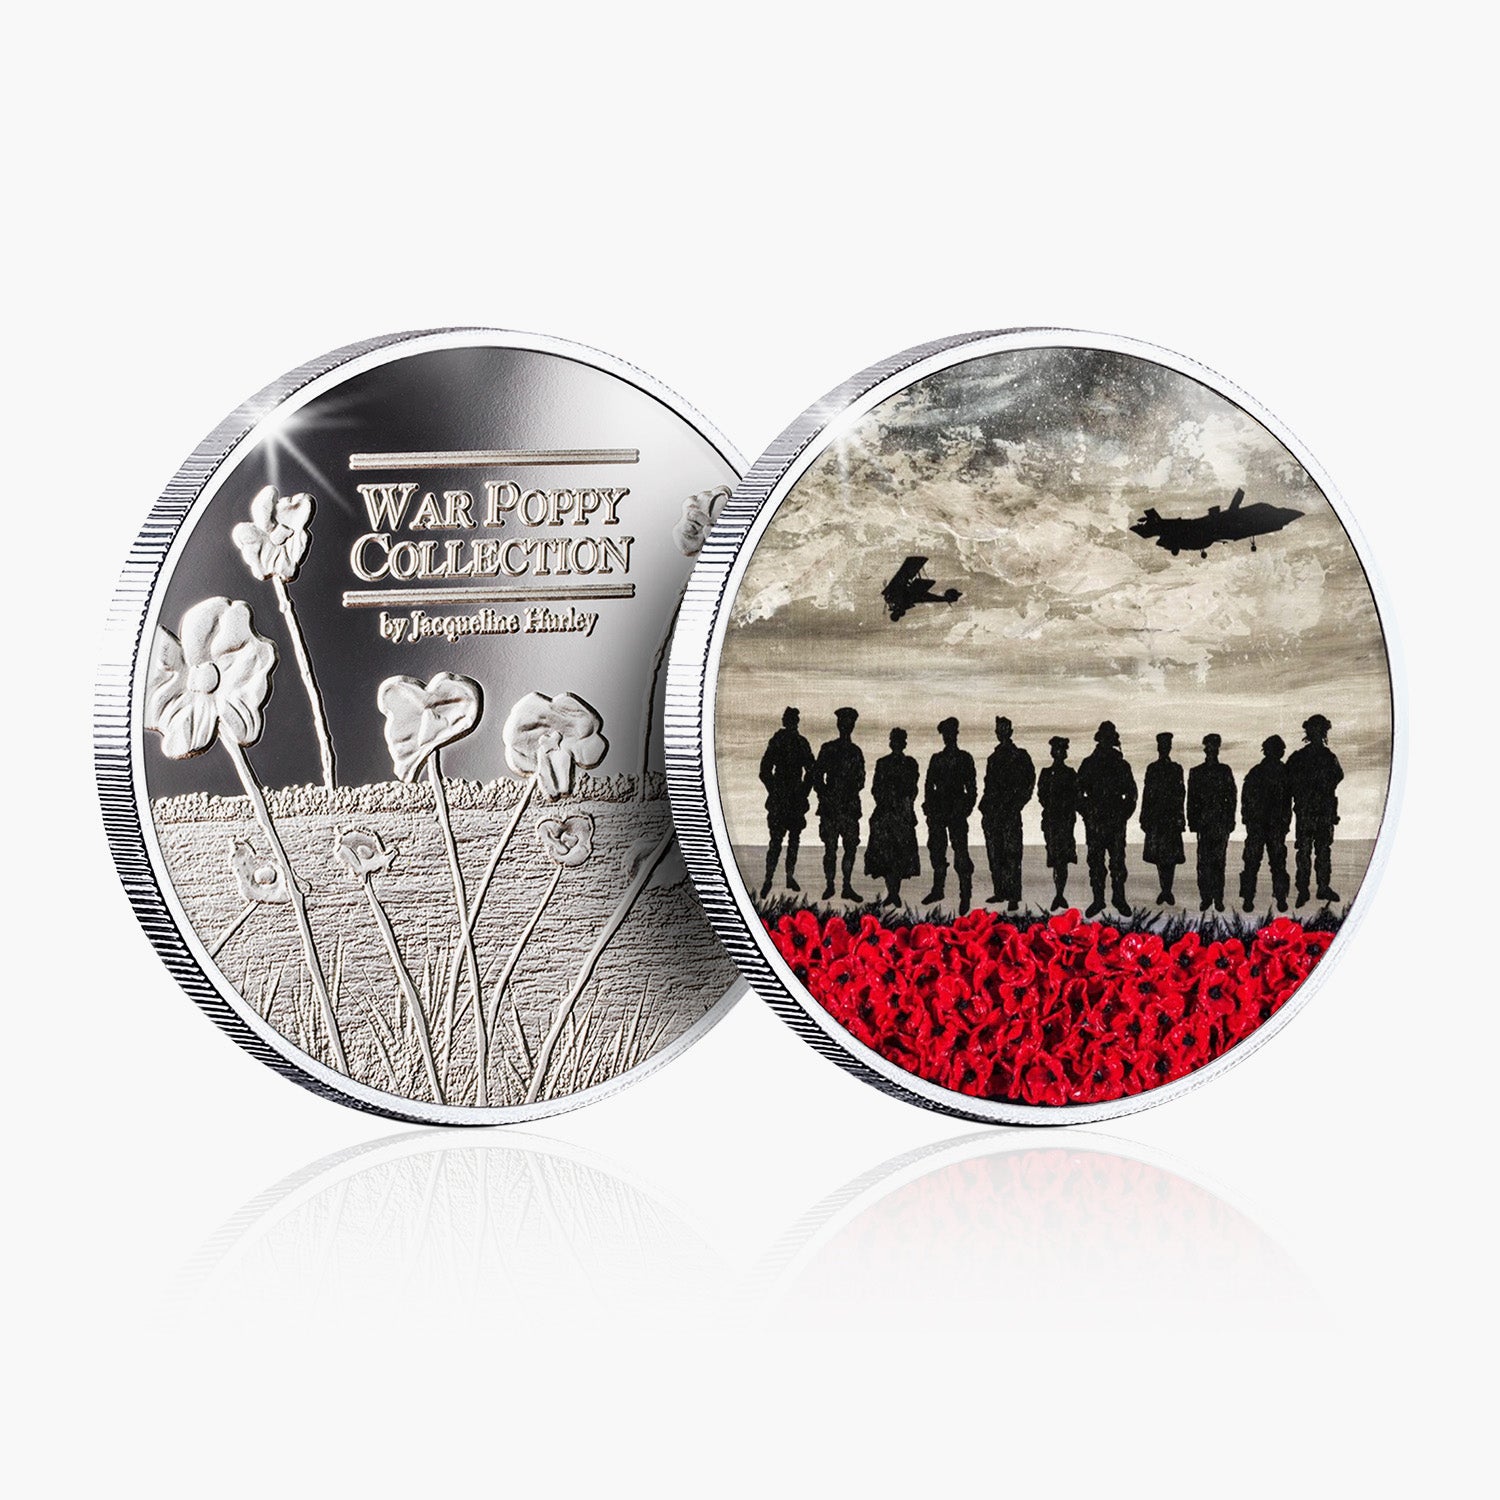 Through Adversity To The Stars Silver-Plated Commemorative